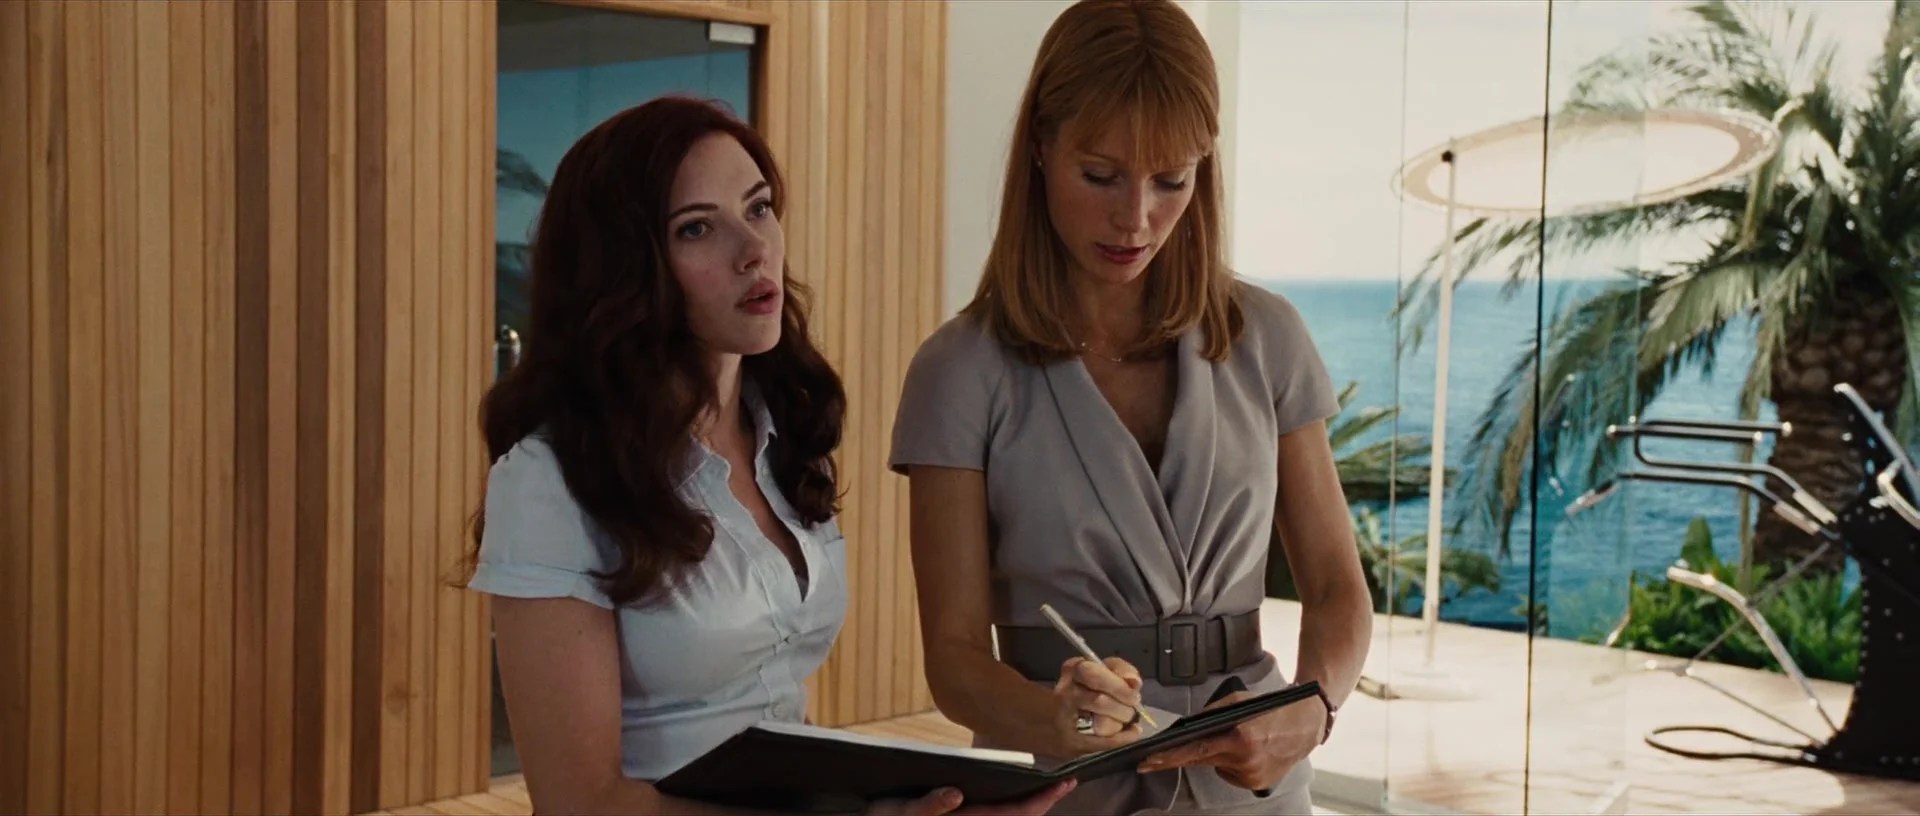 Black Widow (Scarlett Johansson) has some papers for Pepper Potts (Gwenyth Paltrow) in Iron Man 2 (2010), Marvel Entertainment via Blu-ray